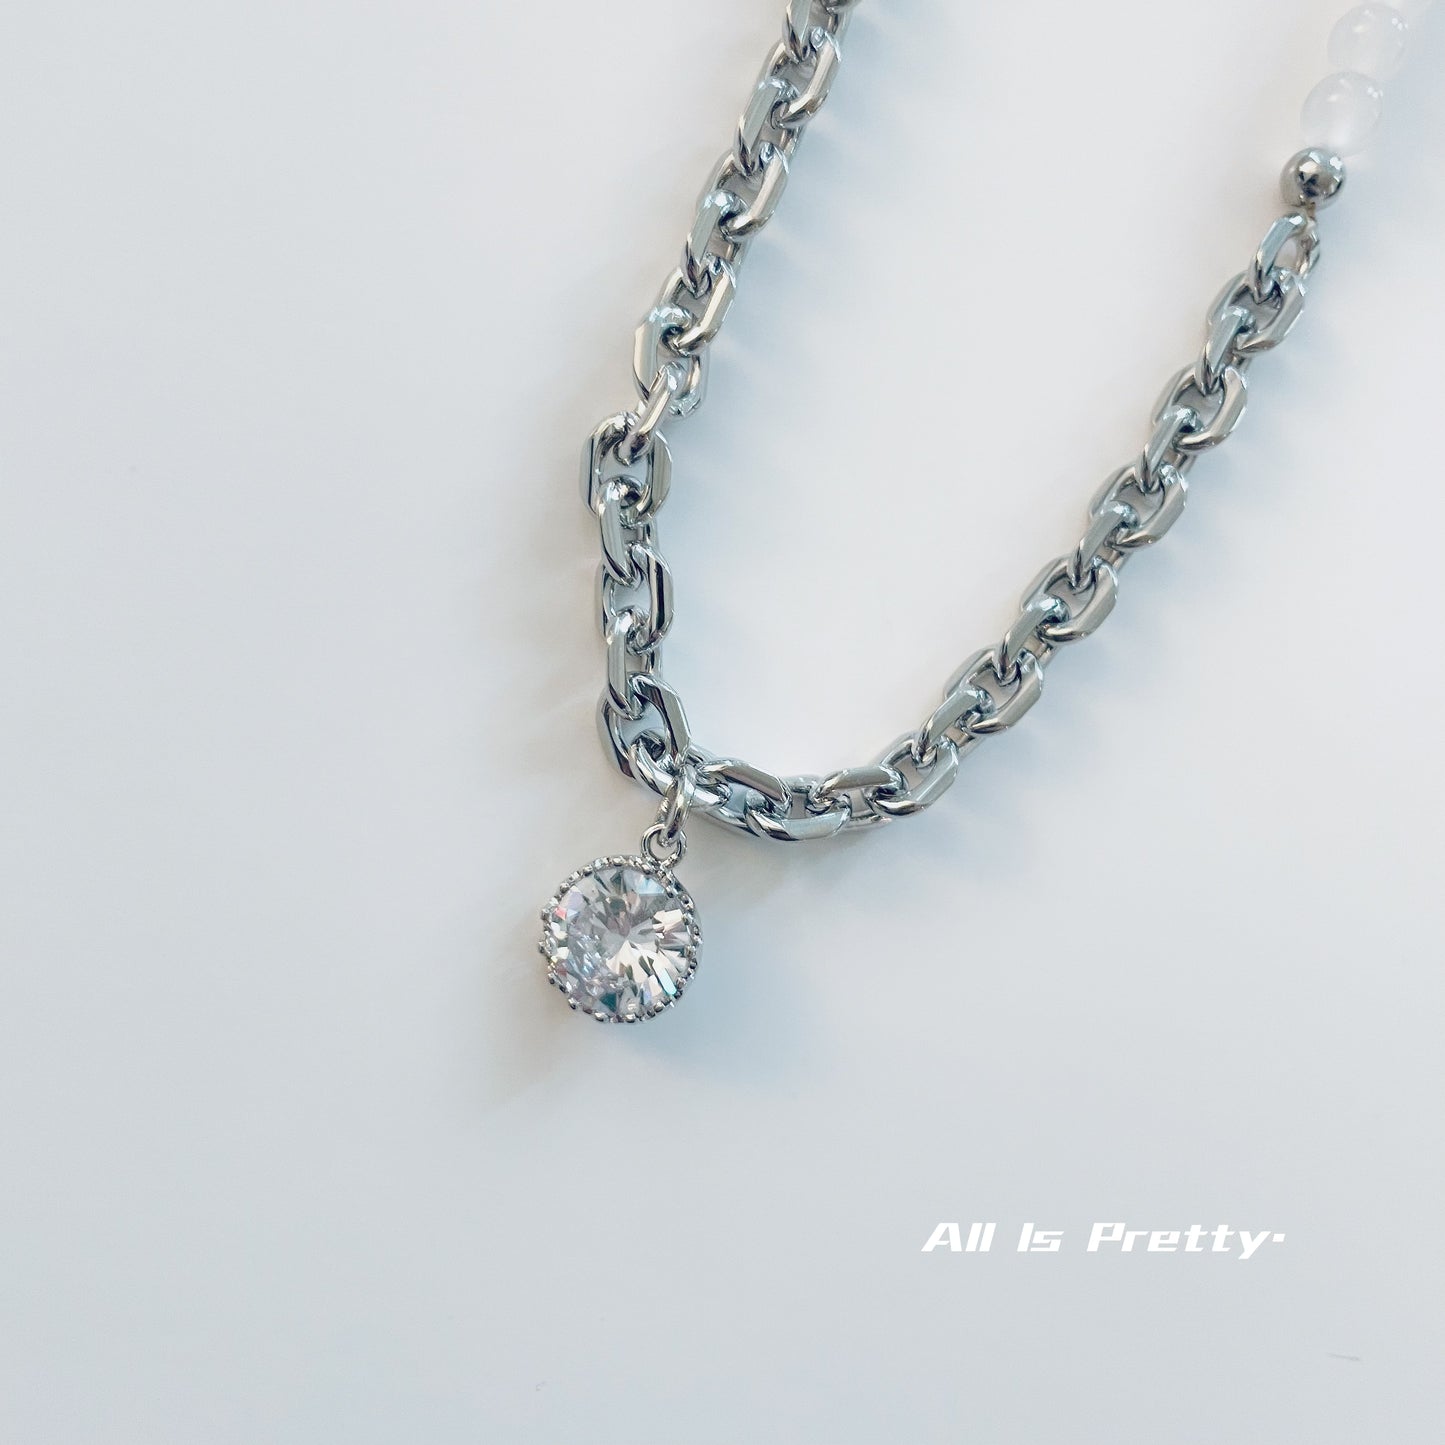 Crystal pendant chain necklace